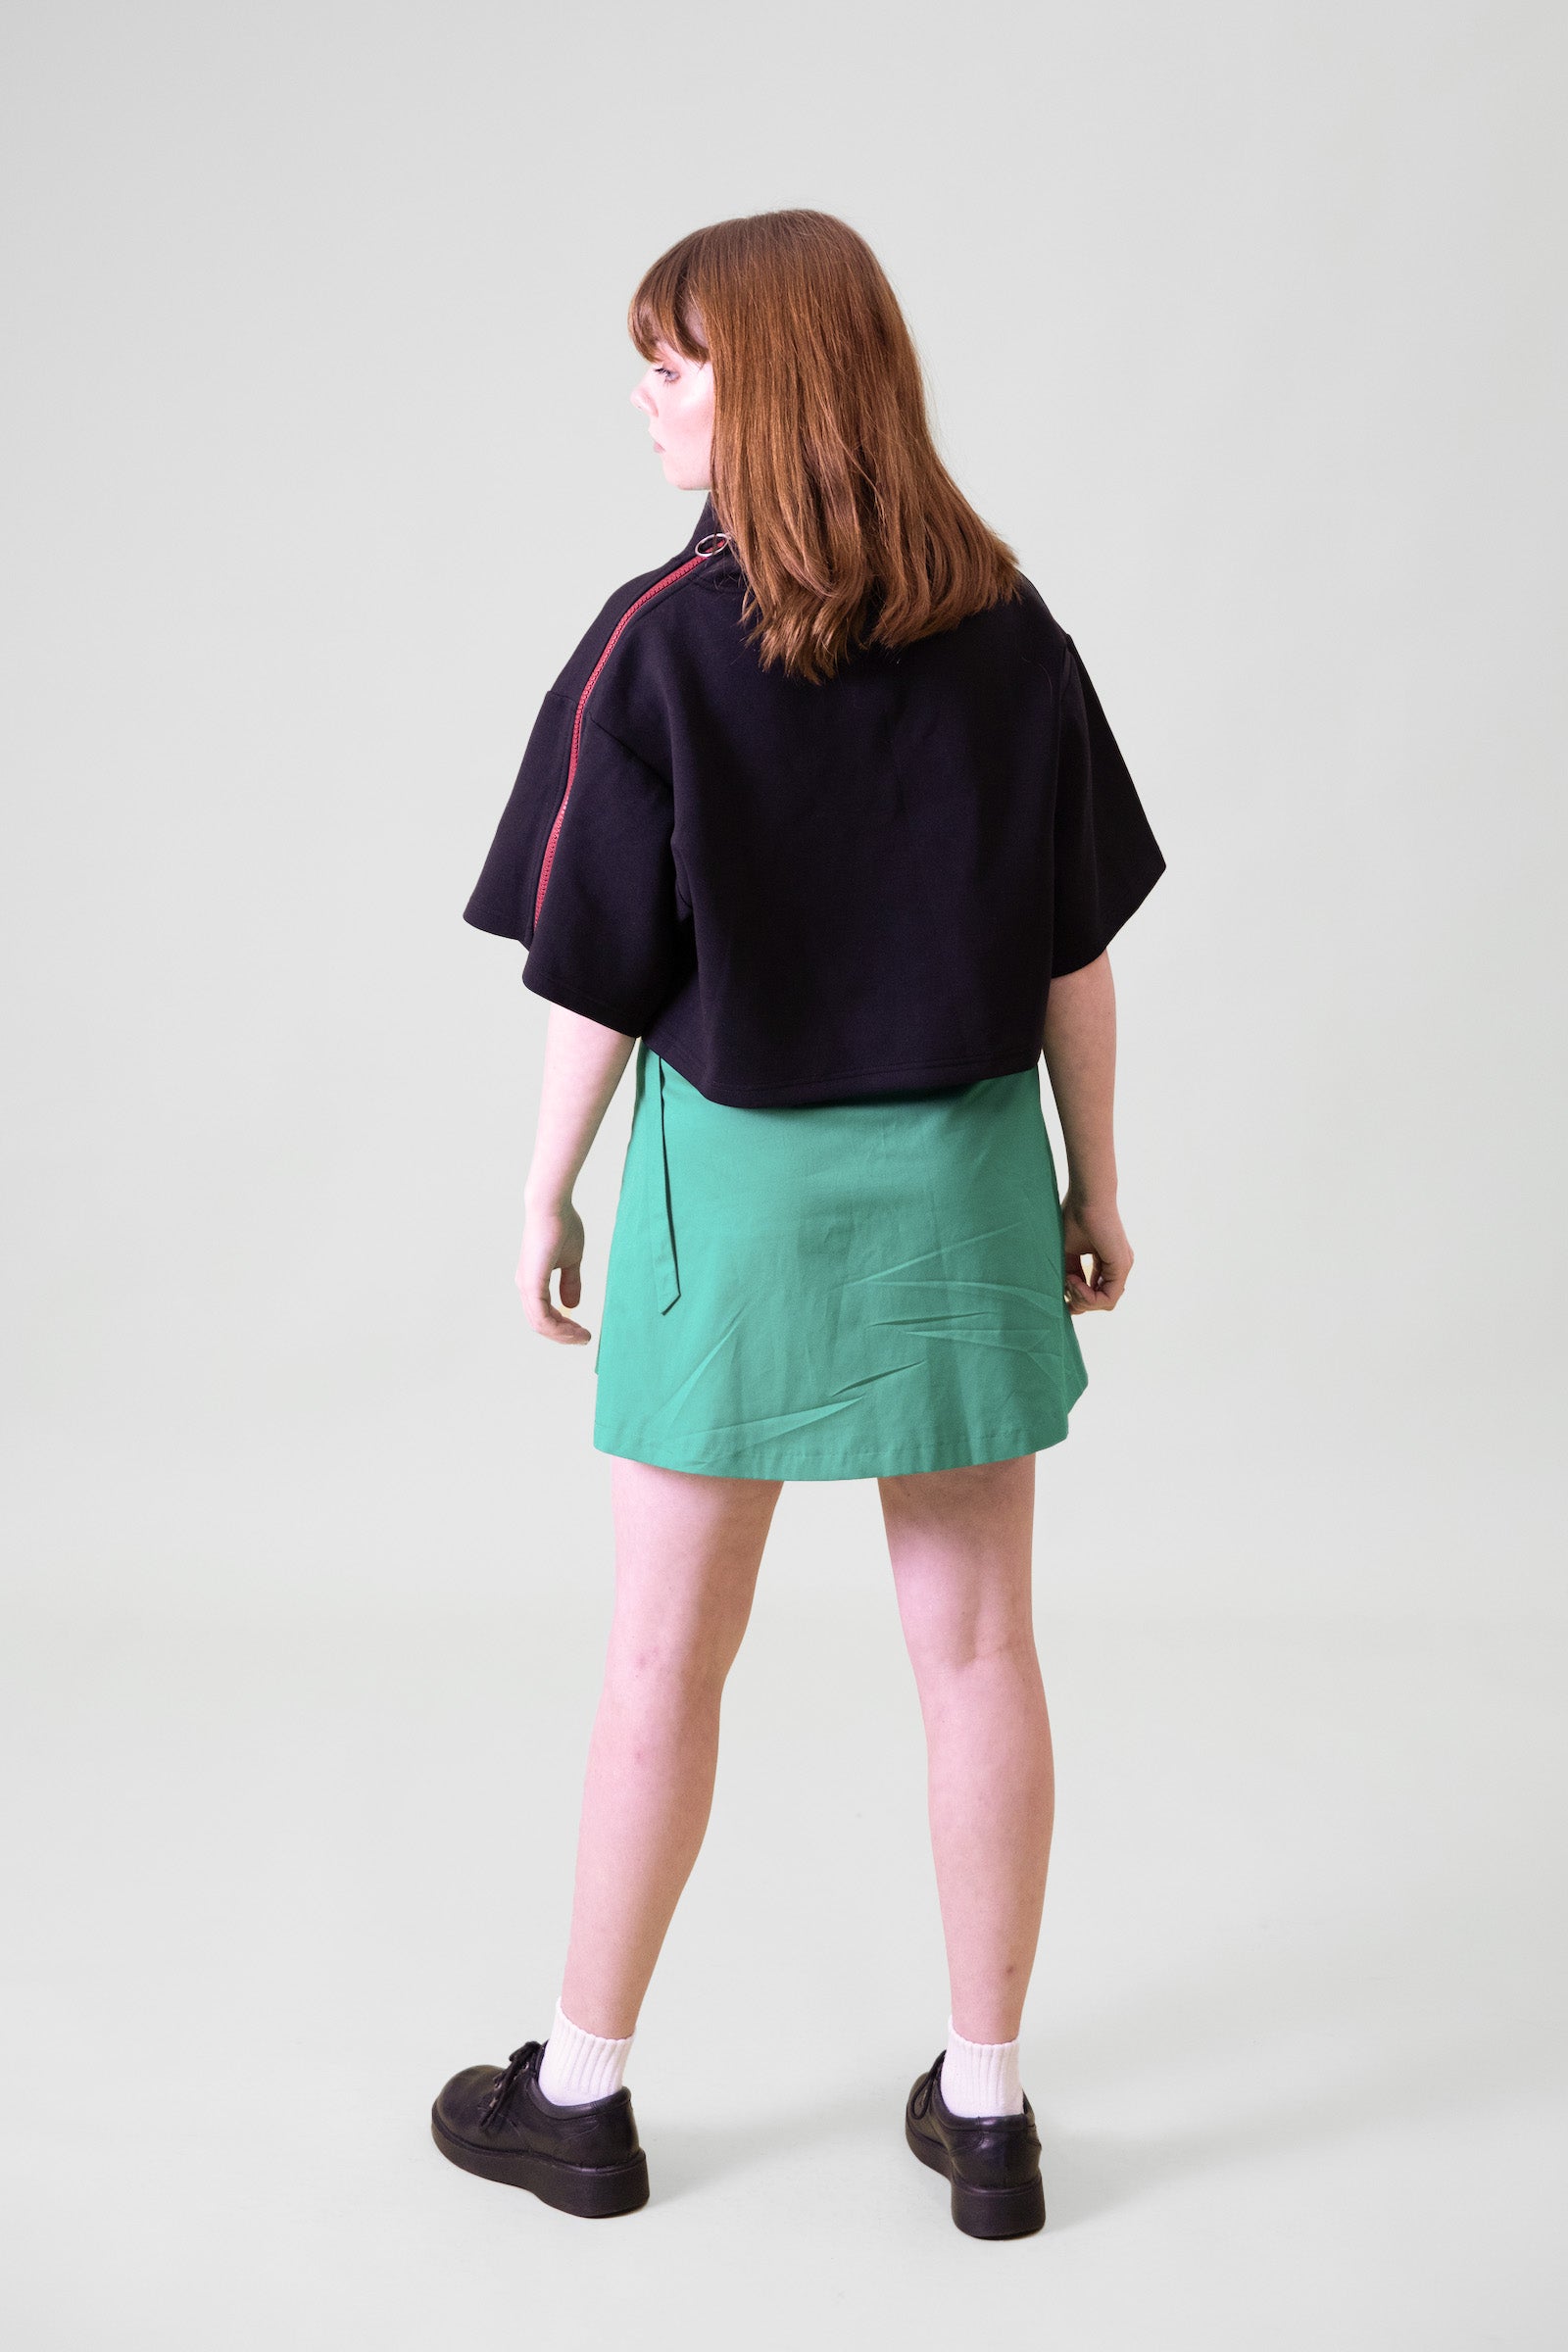 A model standing in front of a grey background facing backwards towards the wall wearing a black cropped top and green wrap skirt with black shoes and white socks #Standing